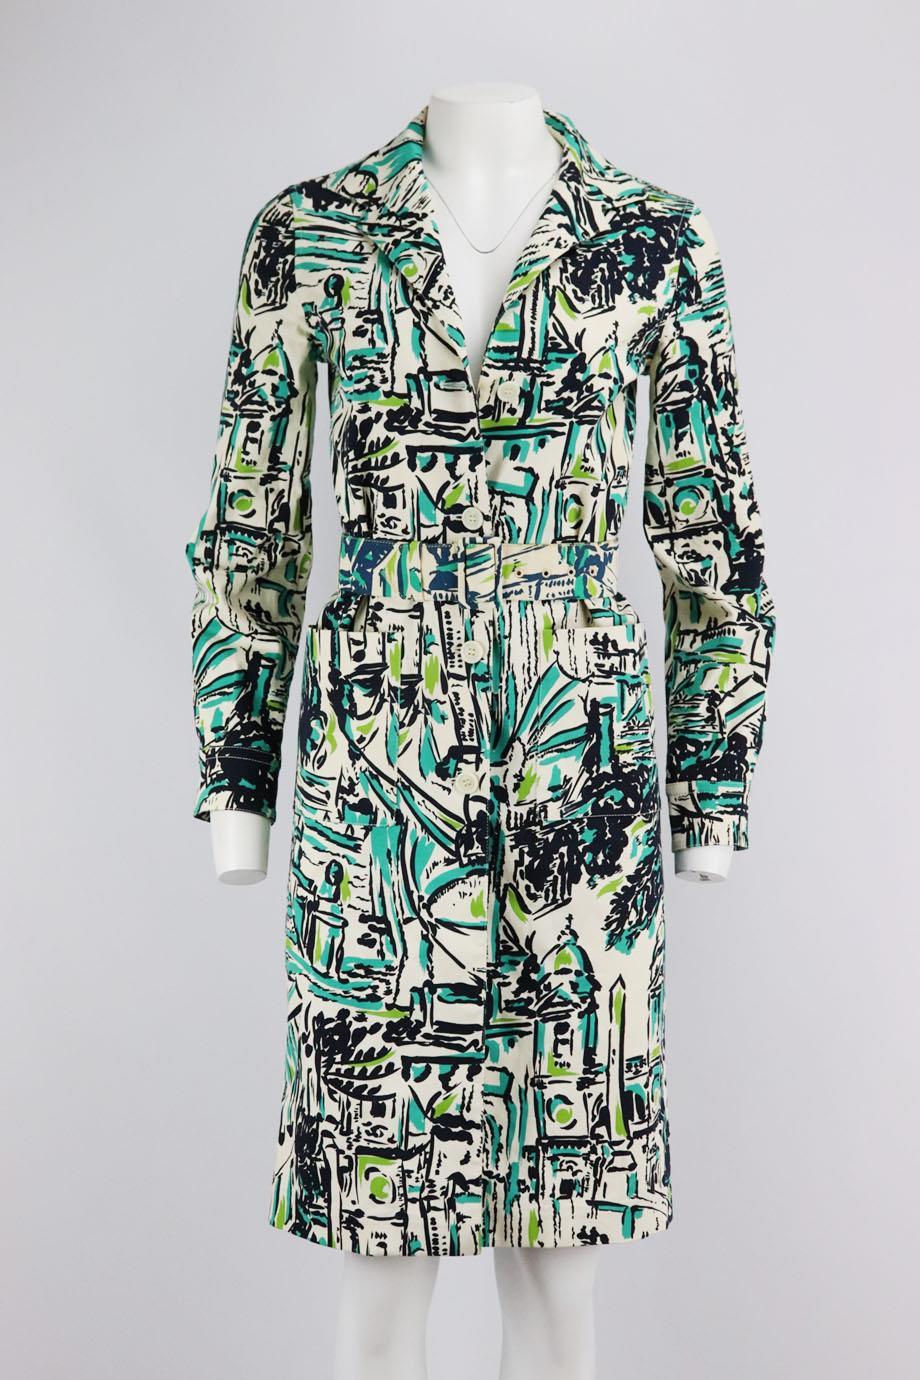 Prada belted printed stretch cotton trench coat. Multicoloured. Long sleeve, v-neck. Button fastening at front. 98% Cotton, 2% elastane. Size: IT 38 (UK 6, US 2, FR 34). Shoulder to shoulder: 15.25 in. Bust: 36.4 in. Waist: 33 in. Hips: 36.4 in.